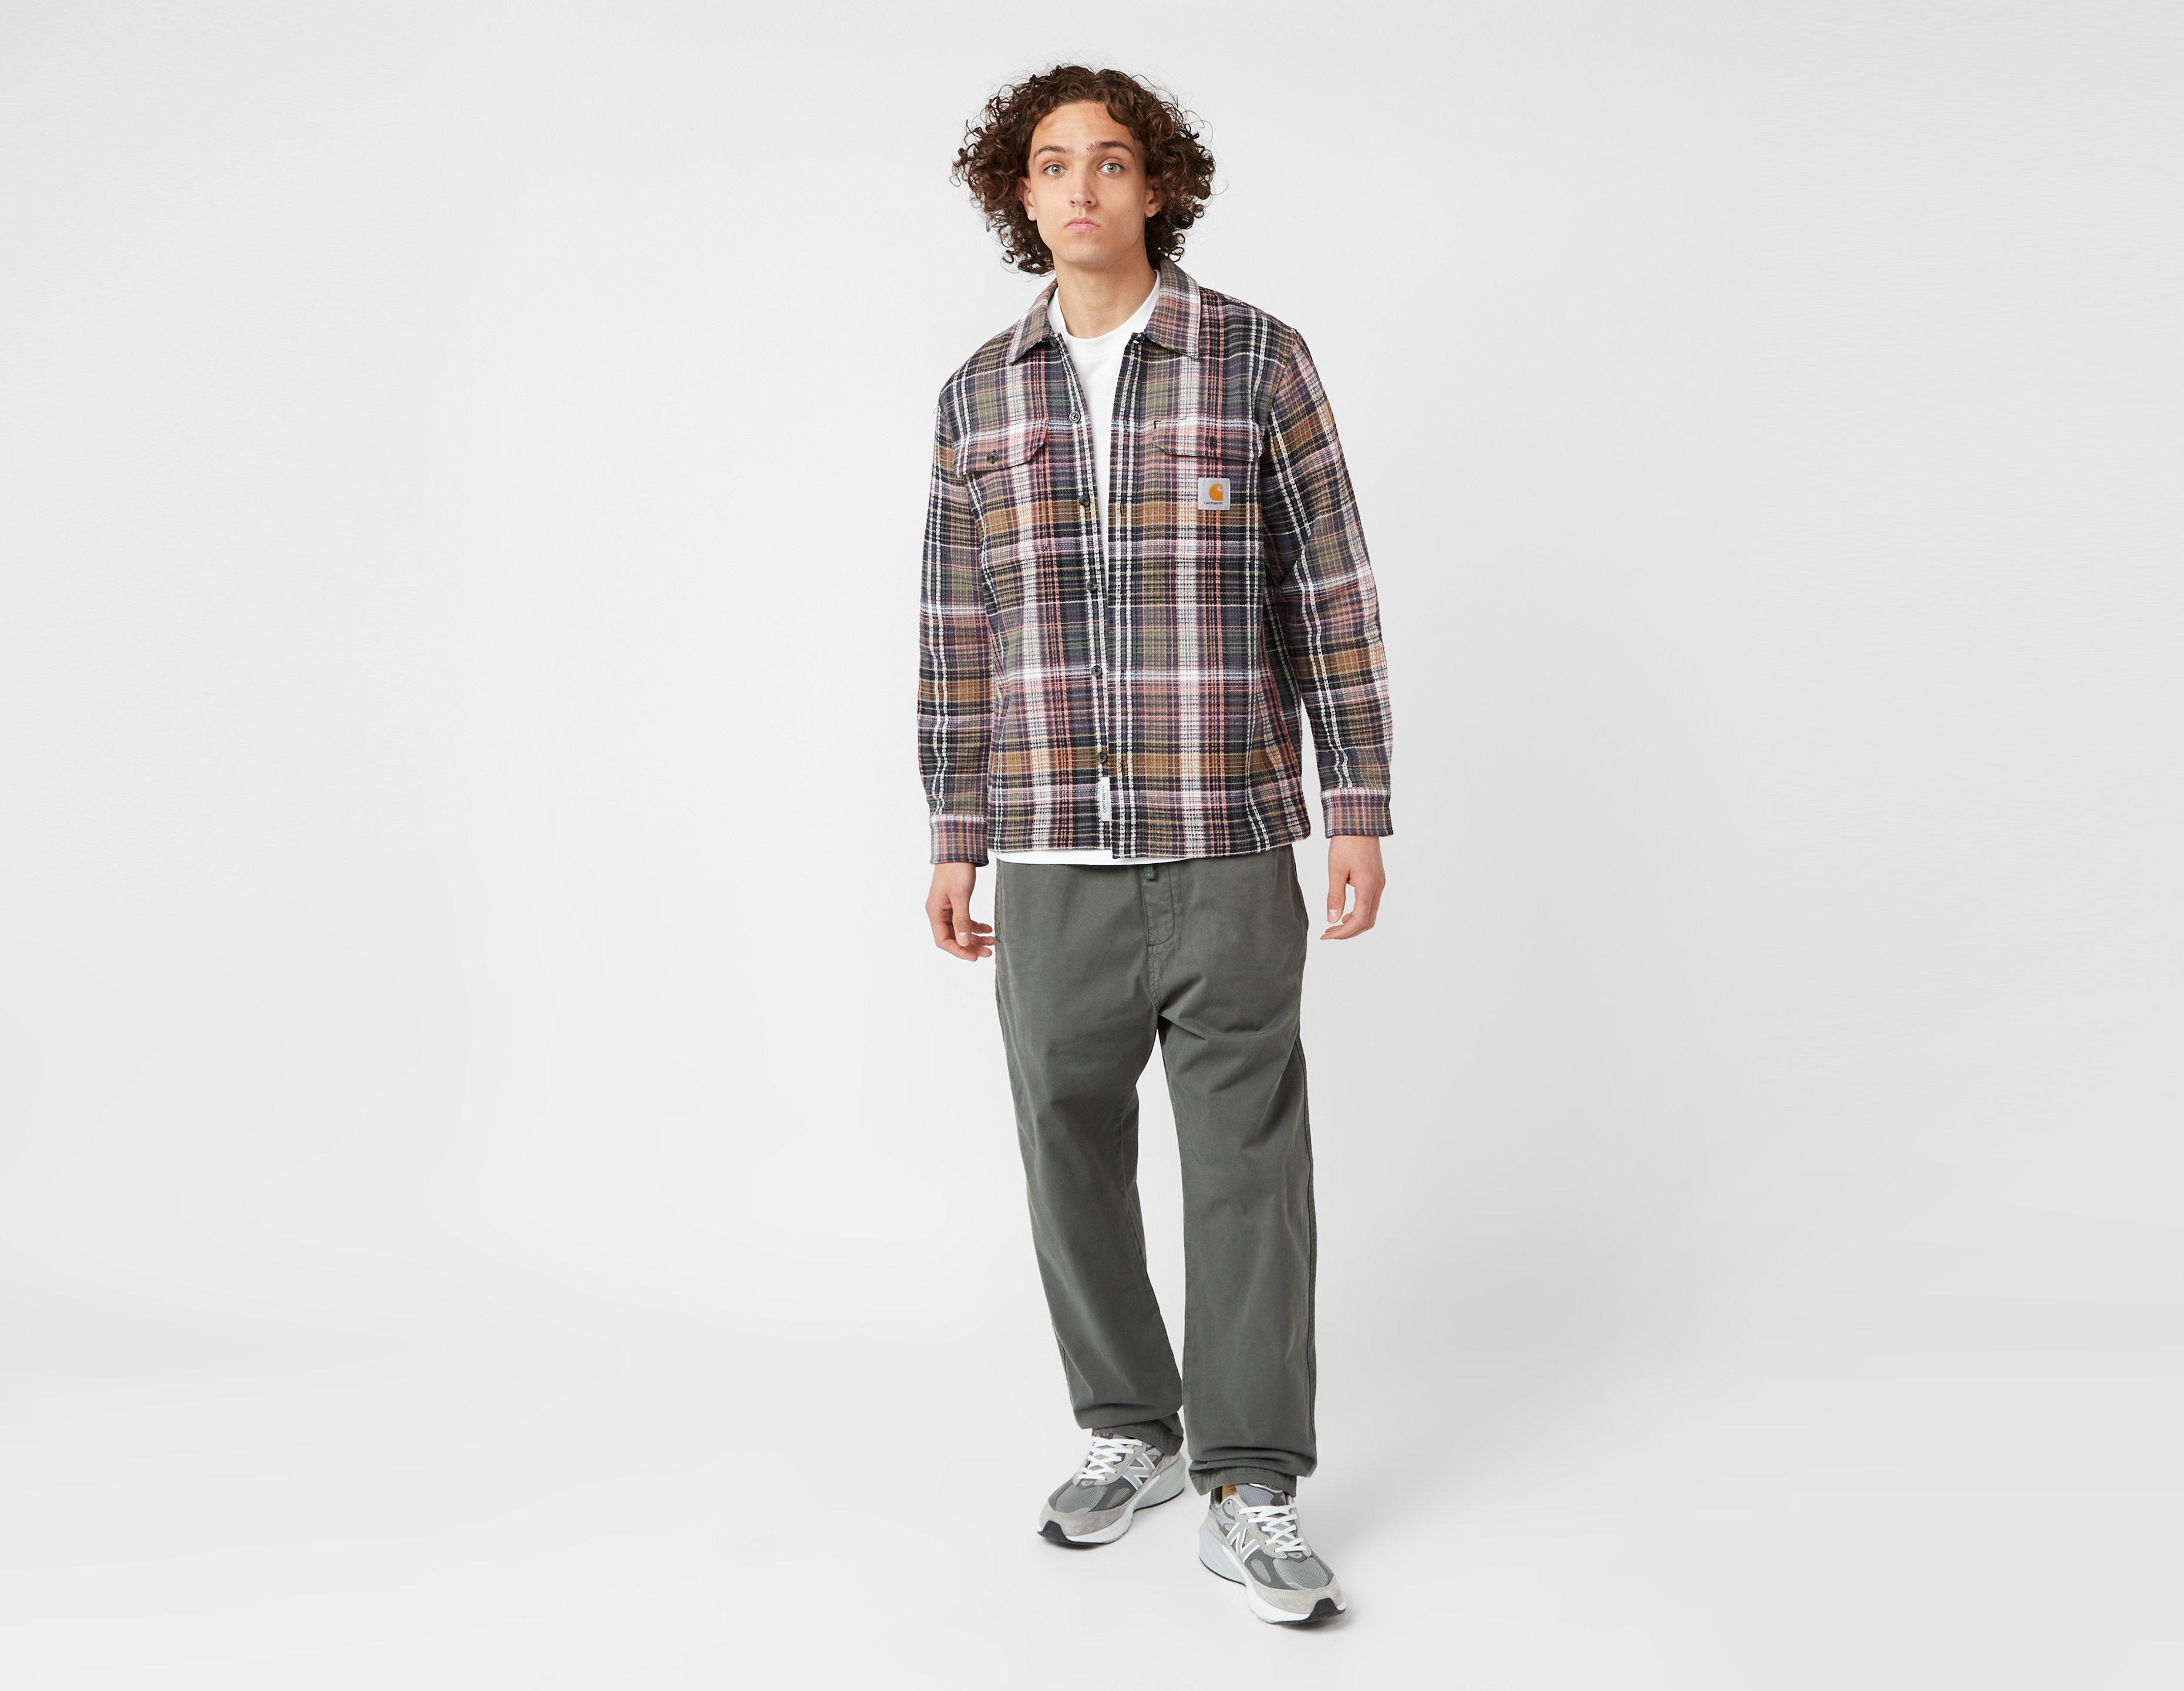 Outfit of the Week - Carhartt WIP, Clarks Originals